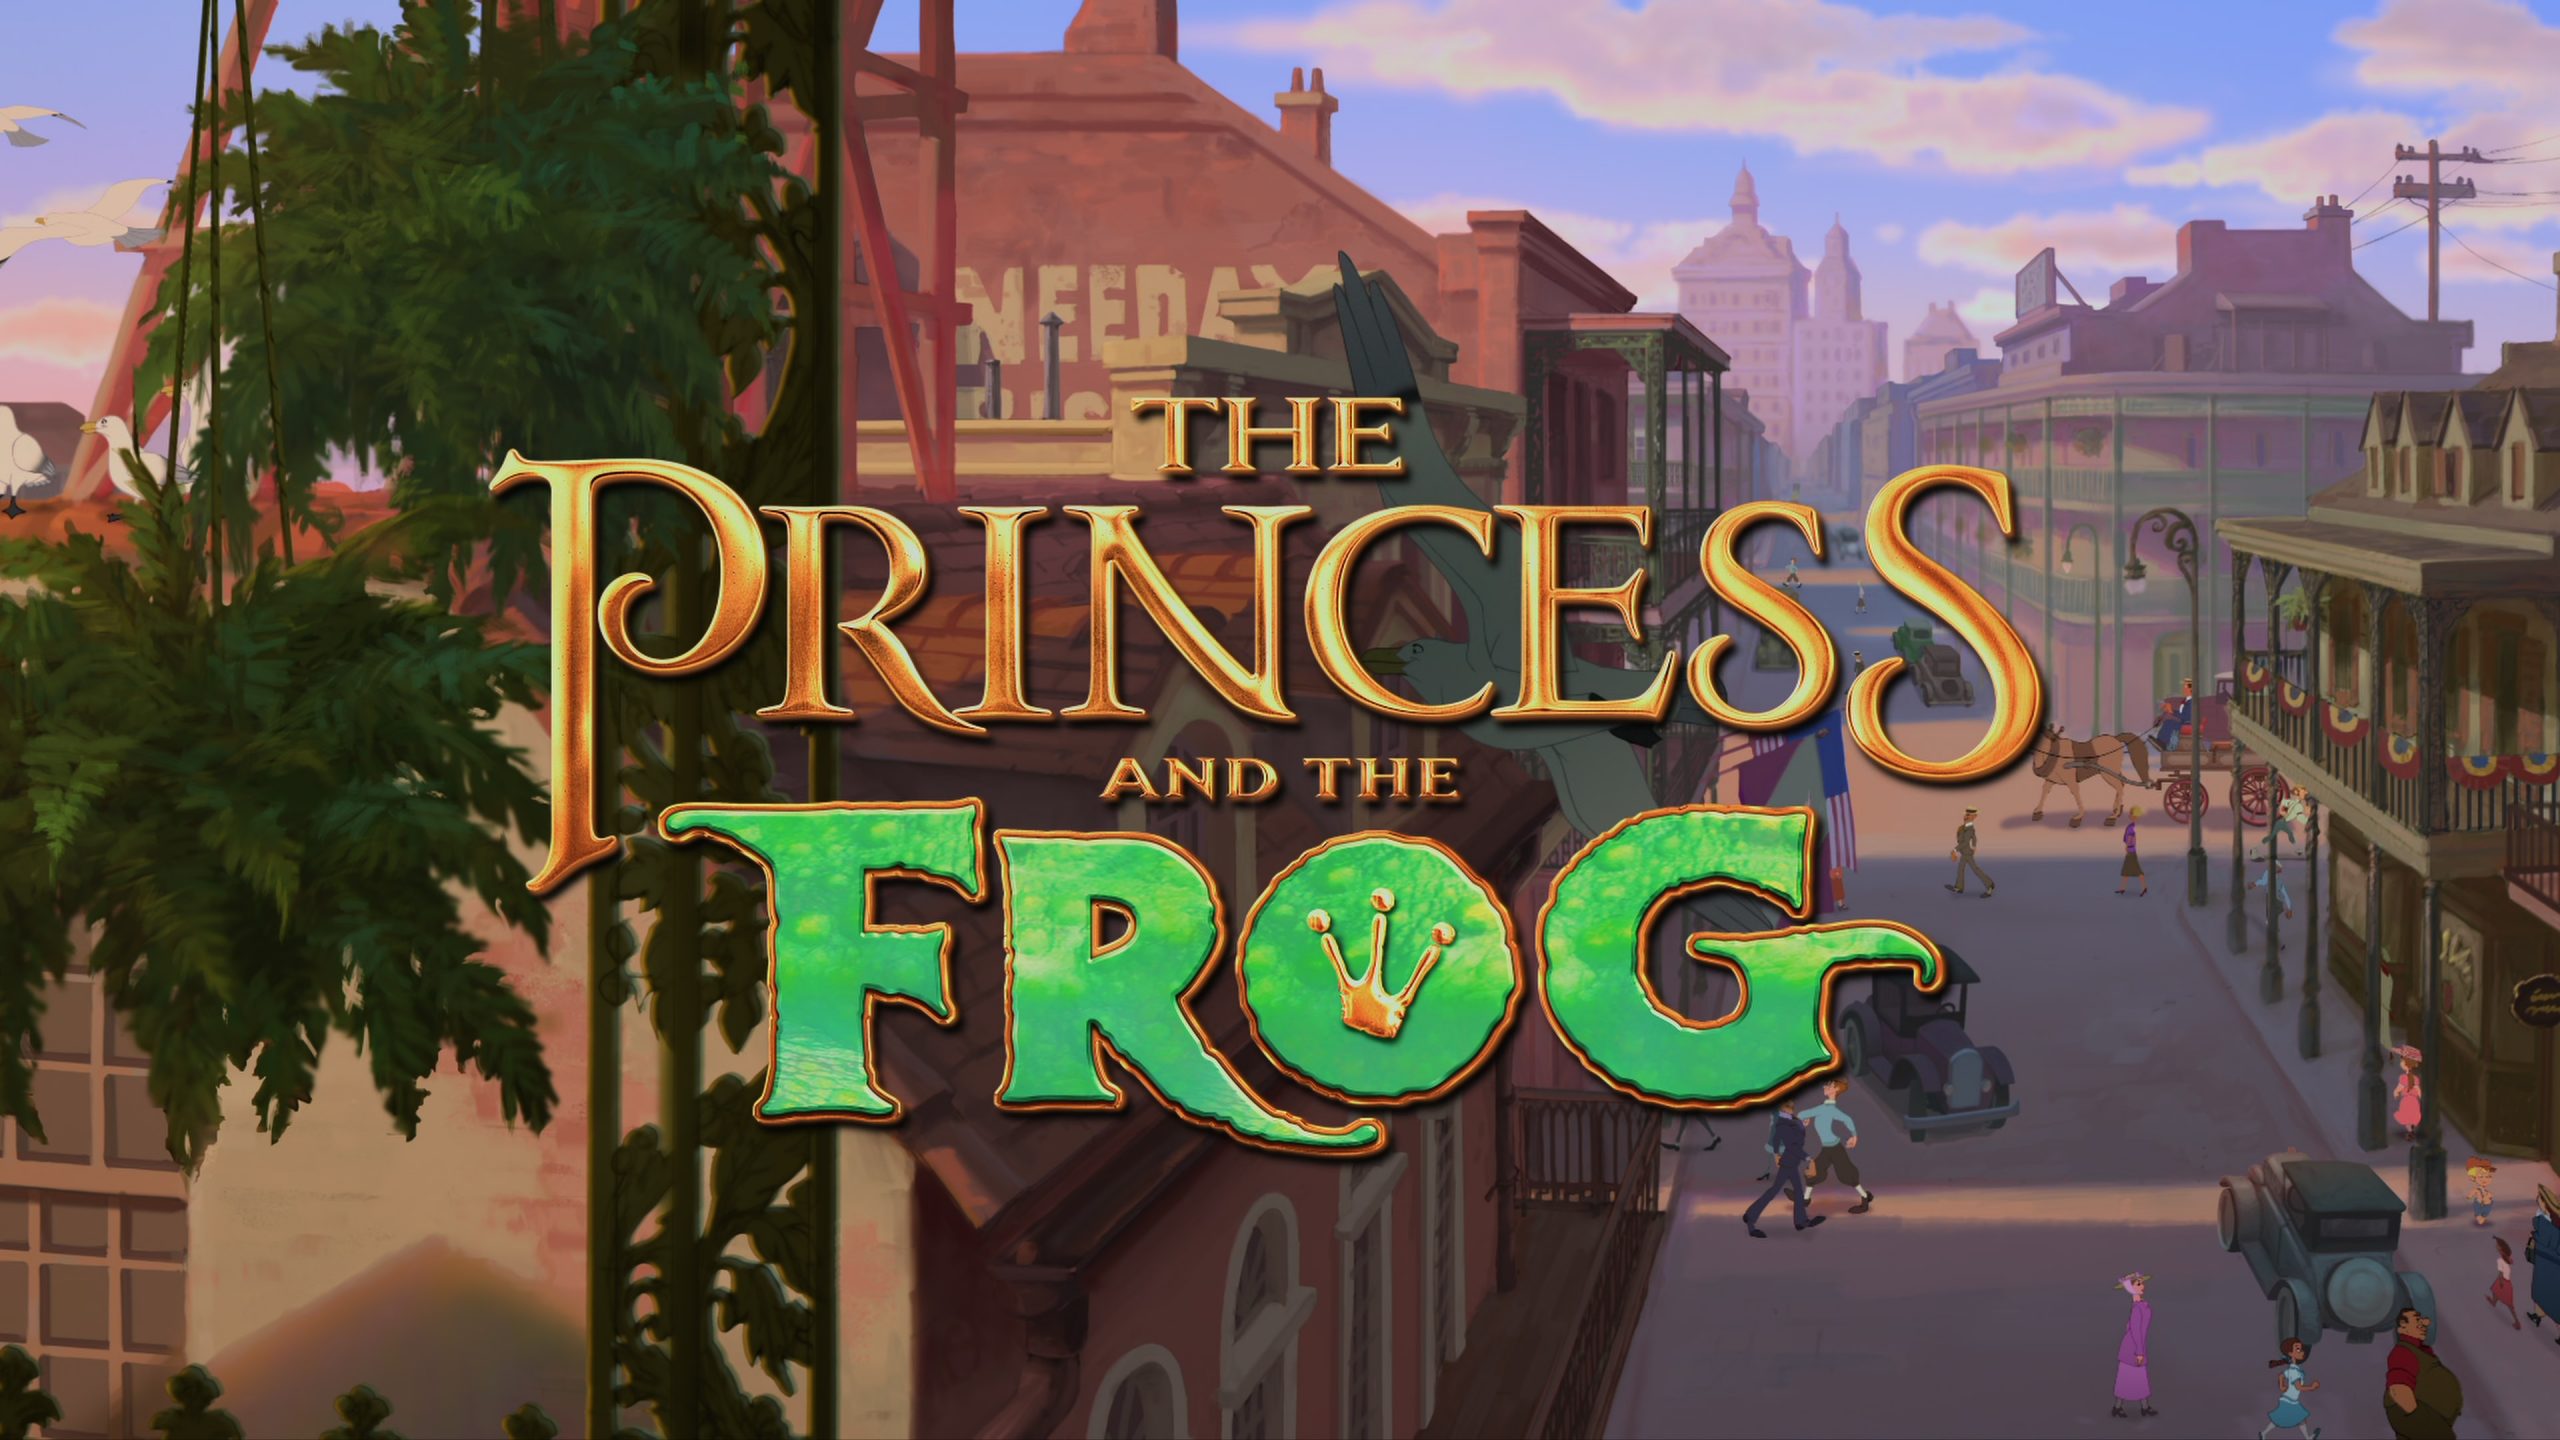 Typography of 'The Princess and the Frog'